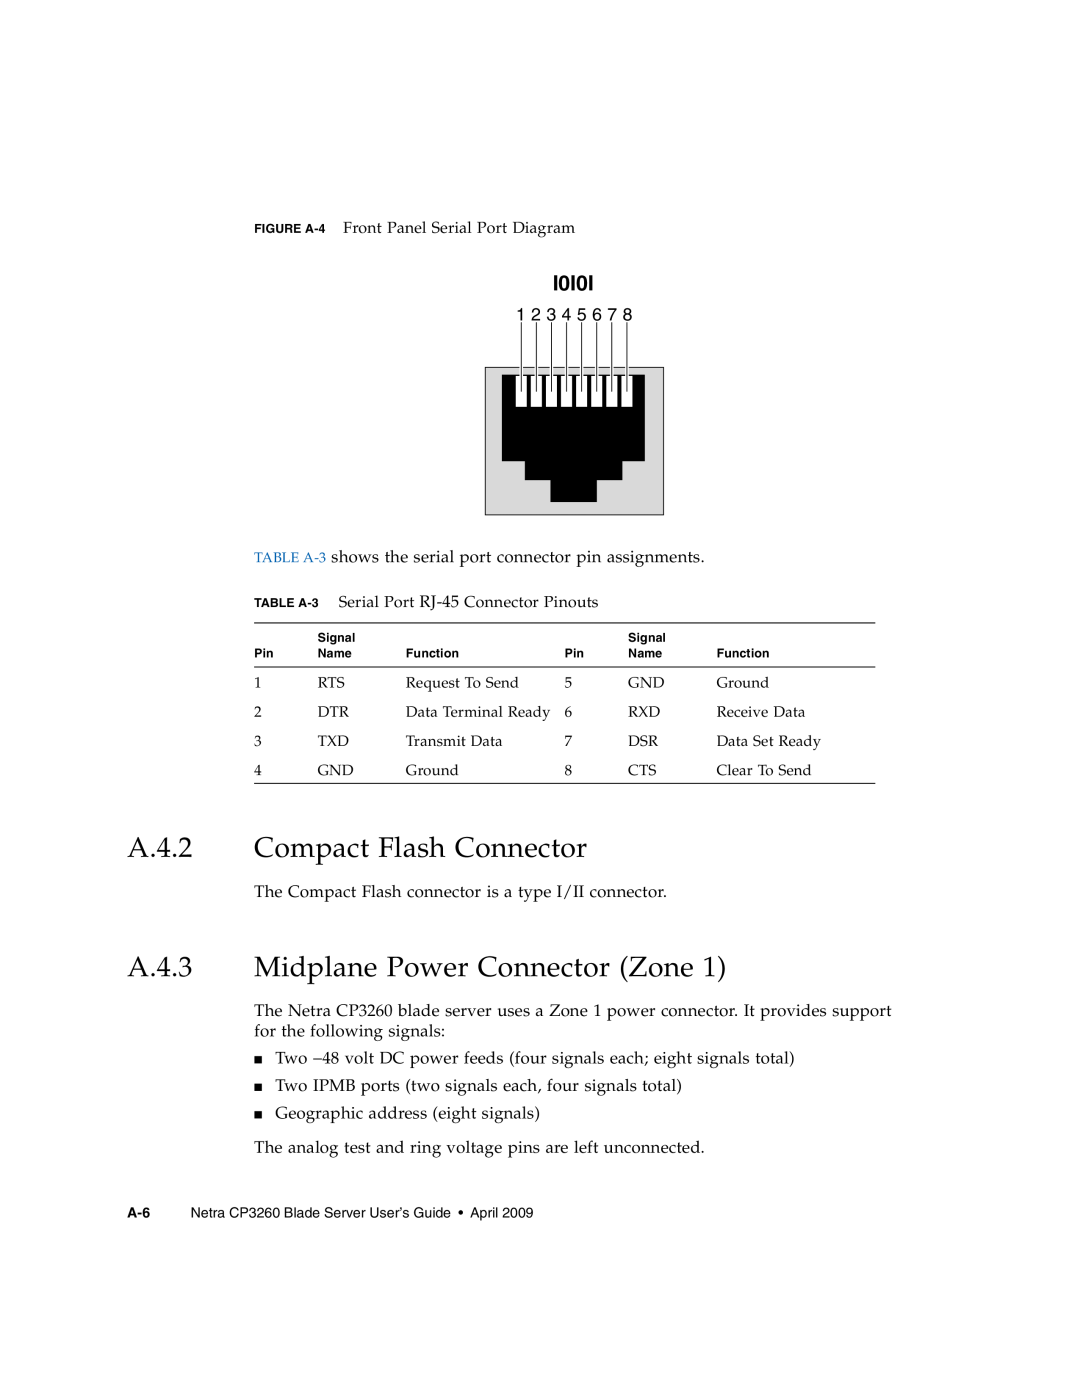 Sun Microsystems CP3260 manual A.4.2 Compact Flash Connector, A.4.3 Midplane Power Connector Zone, I0I0I 